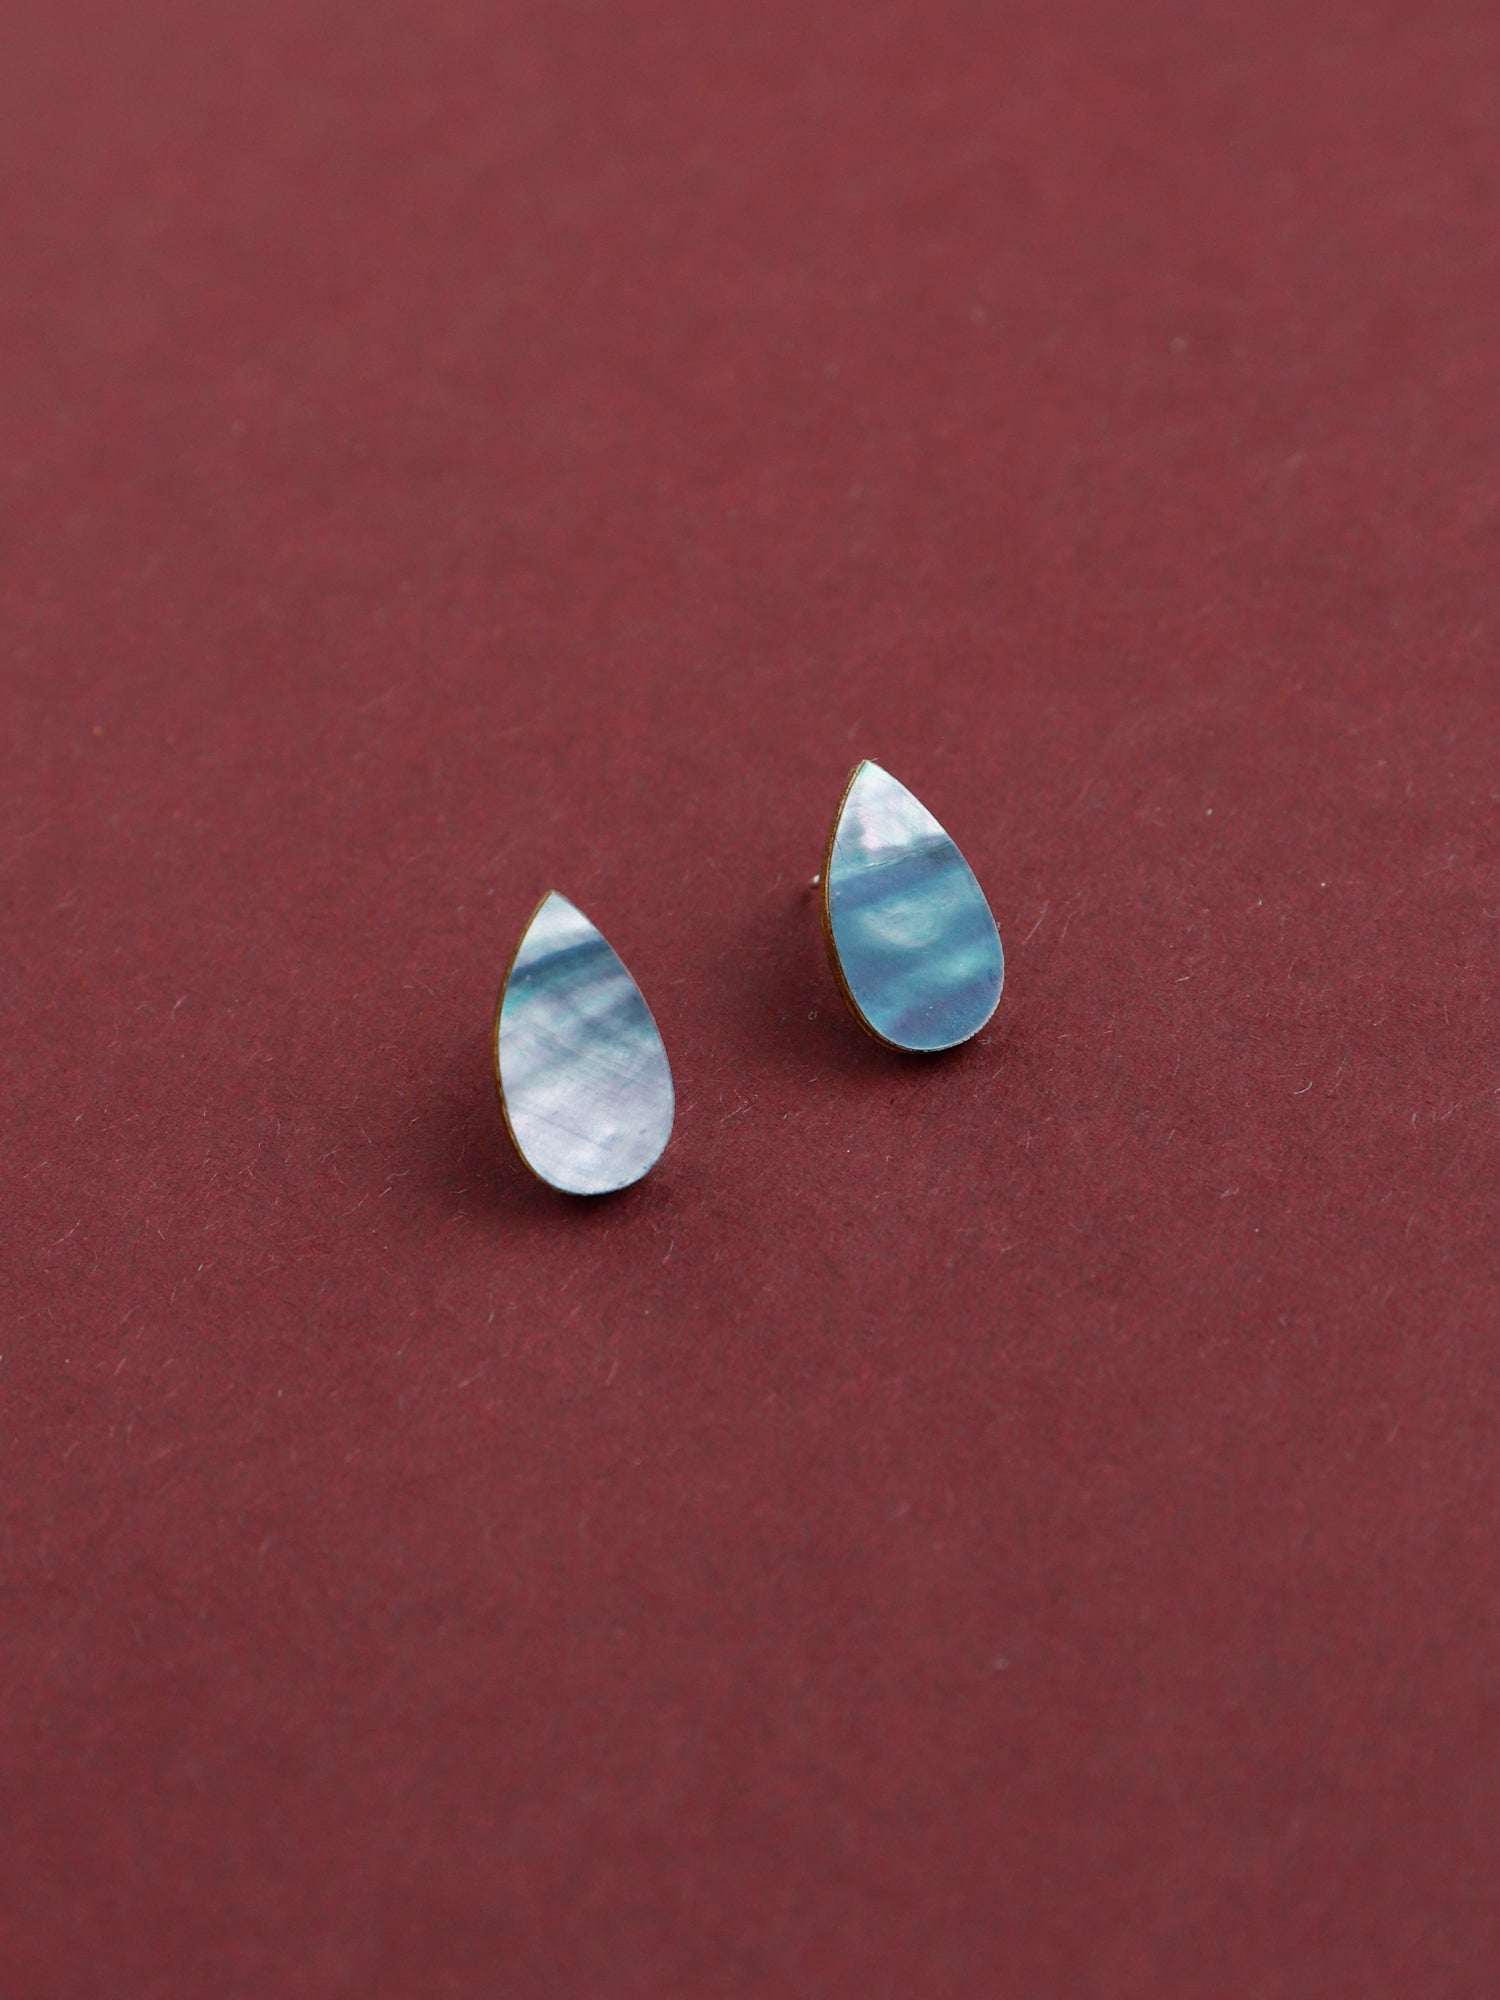 79. Raindrop Studs in Sea Blue - Discontinued